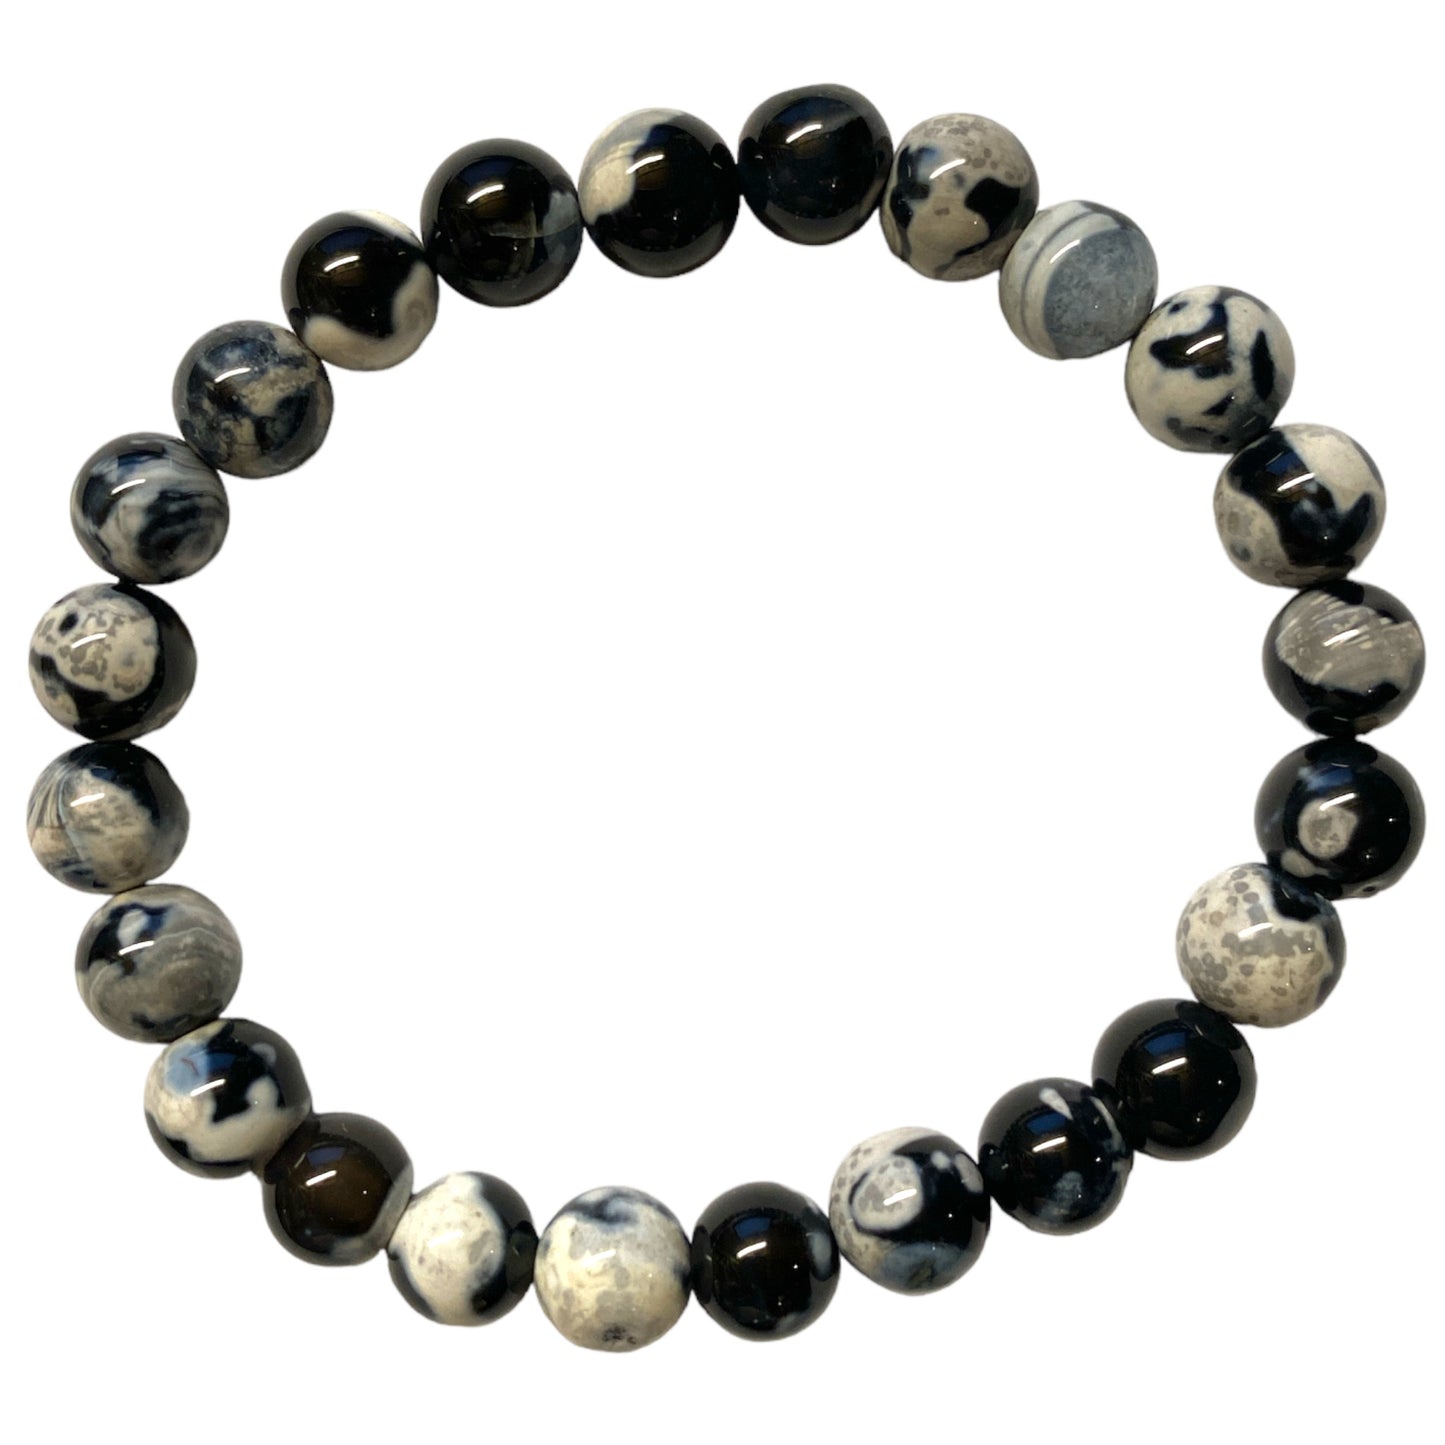 Orca Agate 8mm Bracelet - 7 inch - China - NEW323